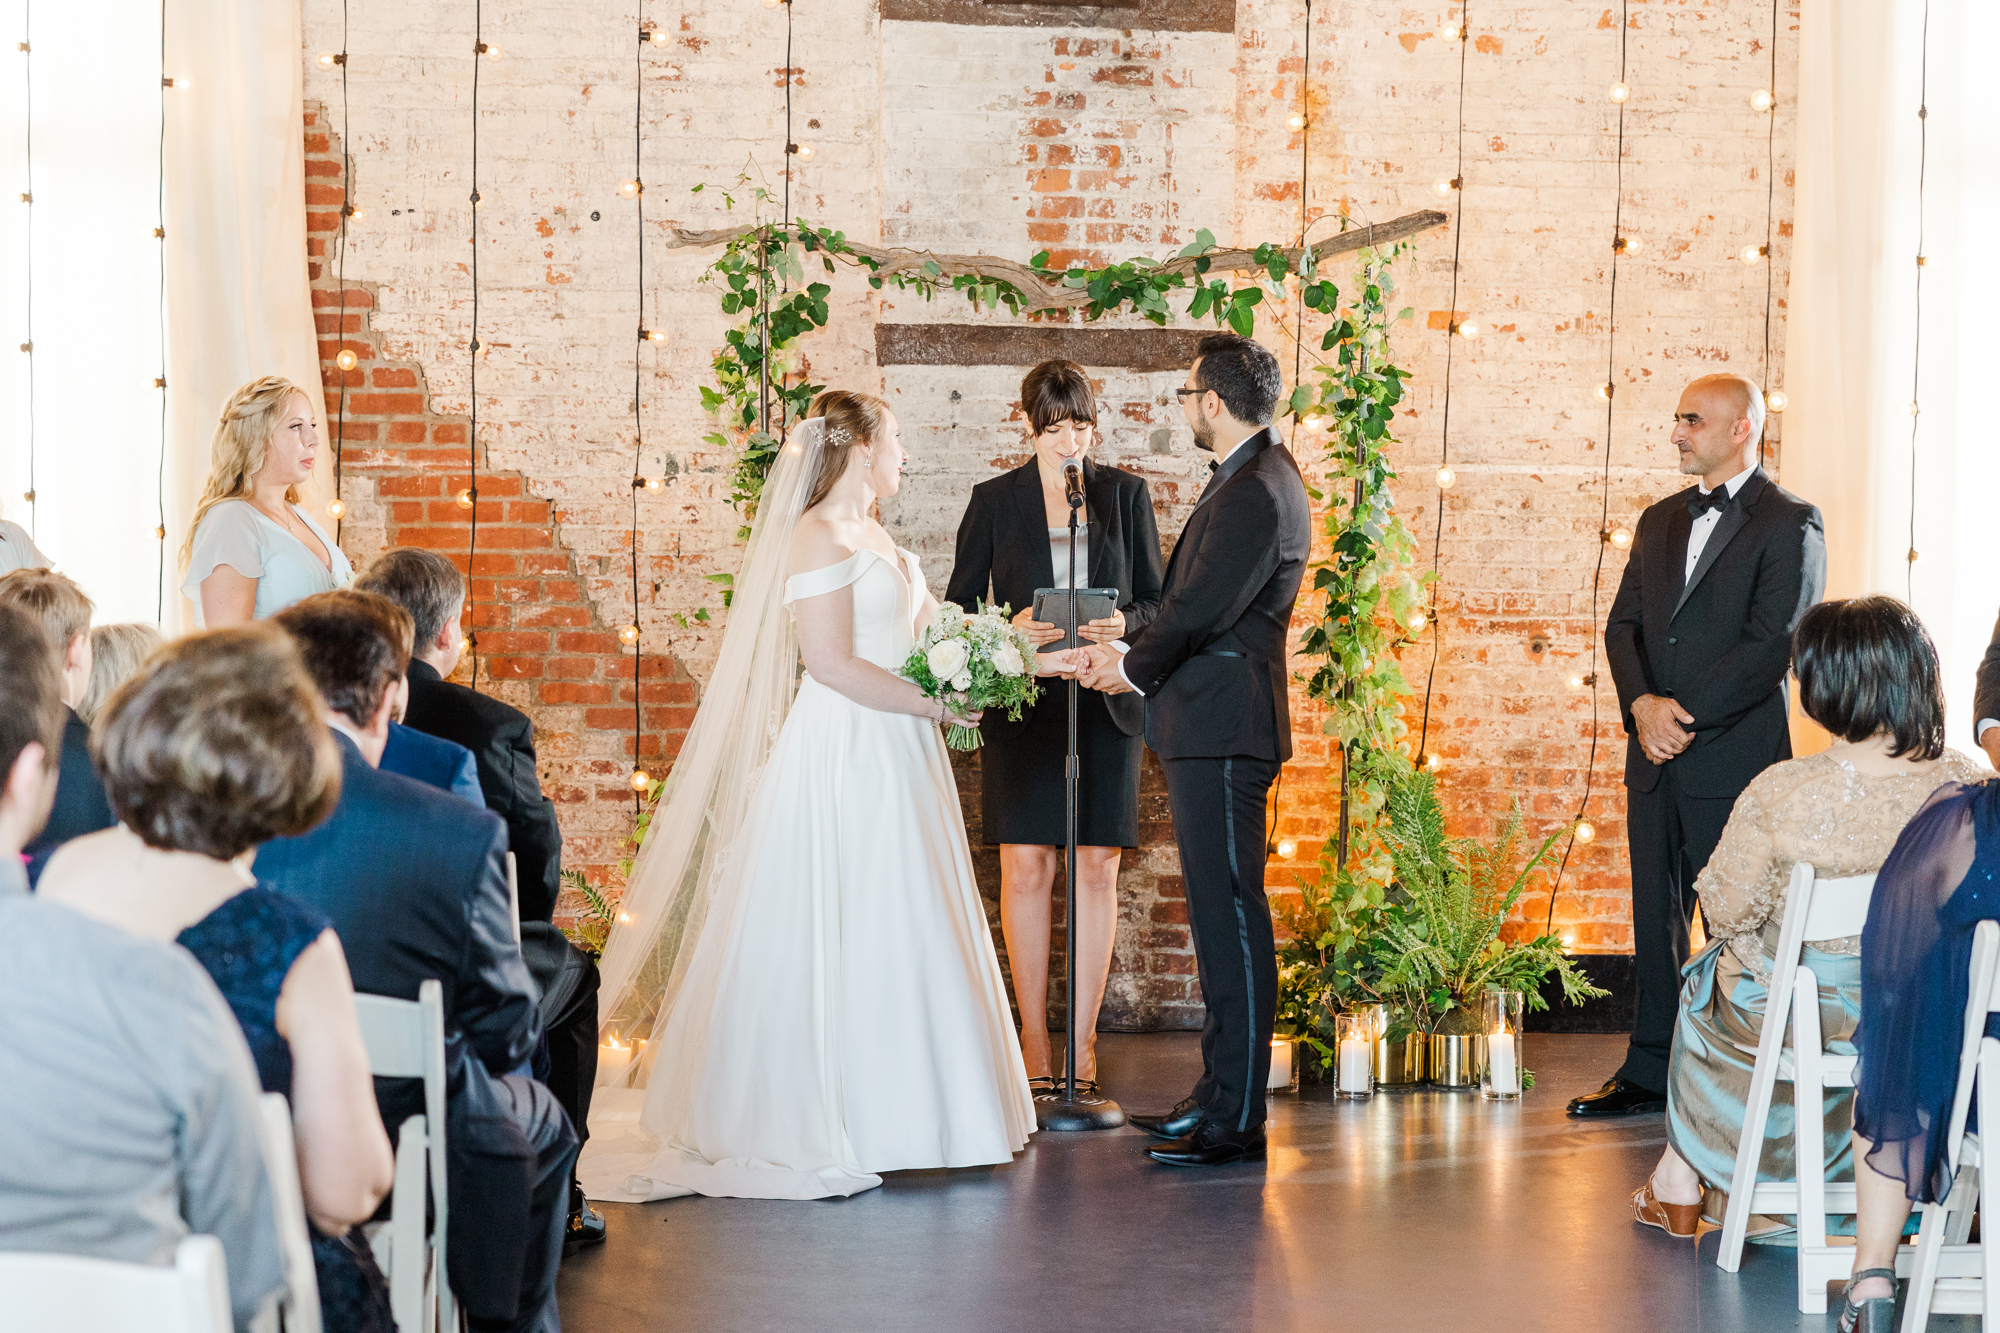 Ceremony Green Building Wedding Photography with Rustic Elements